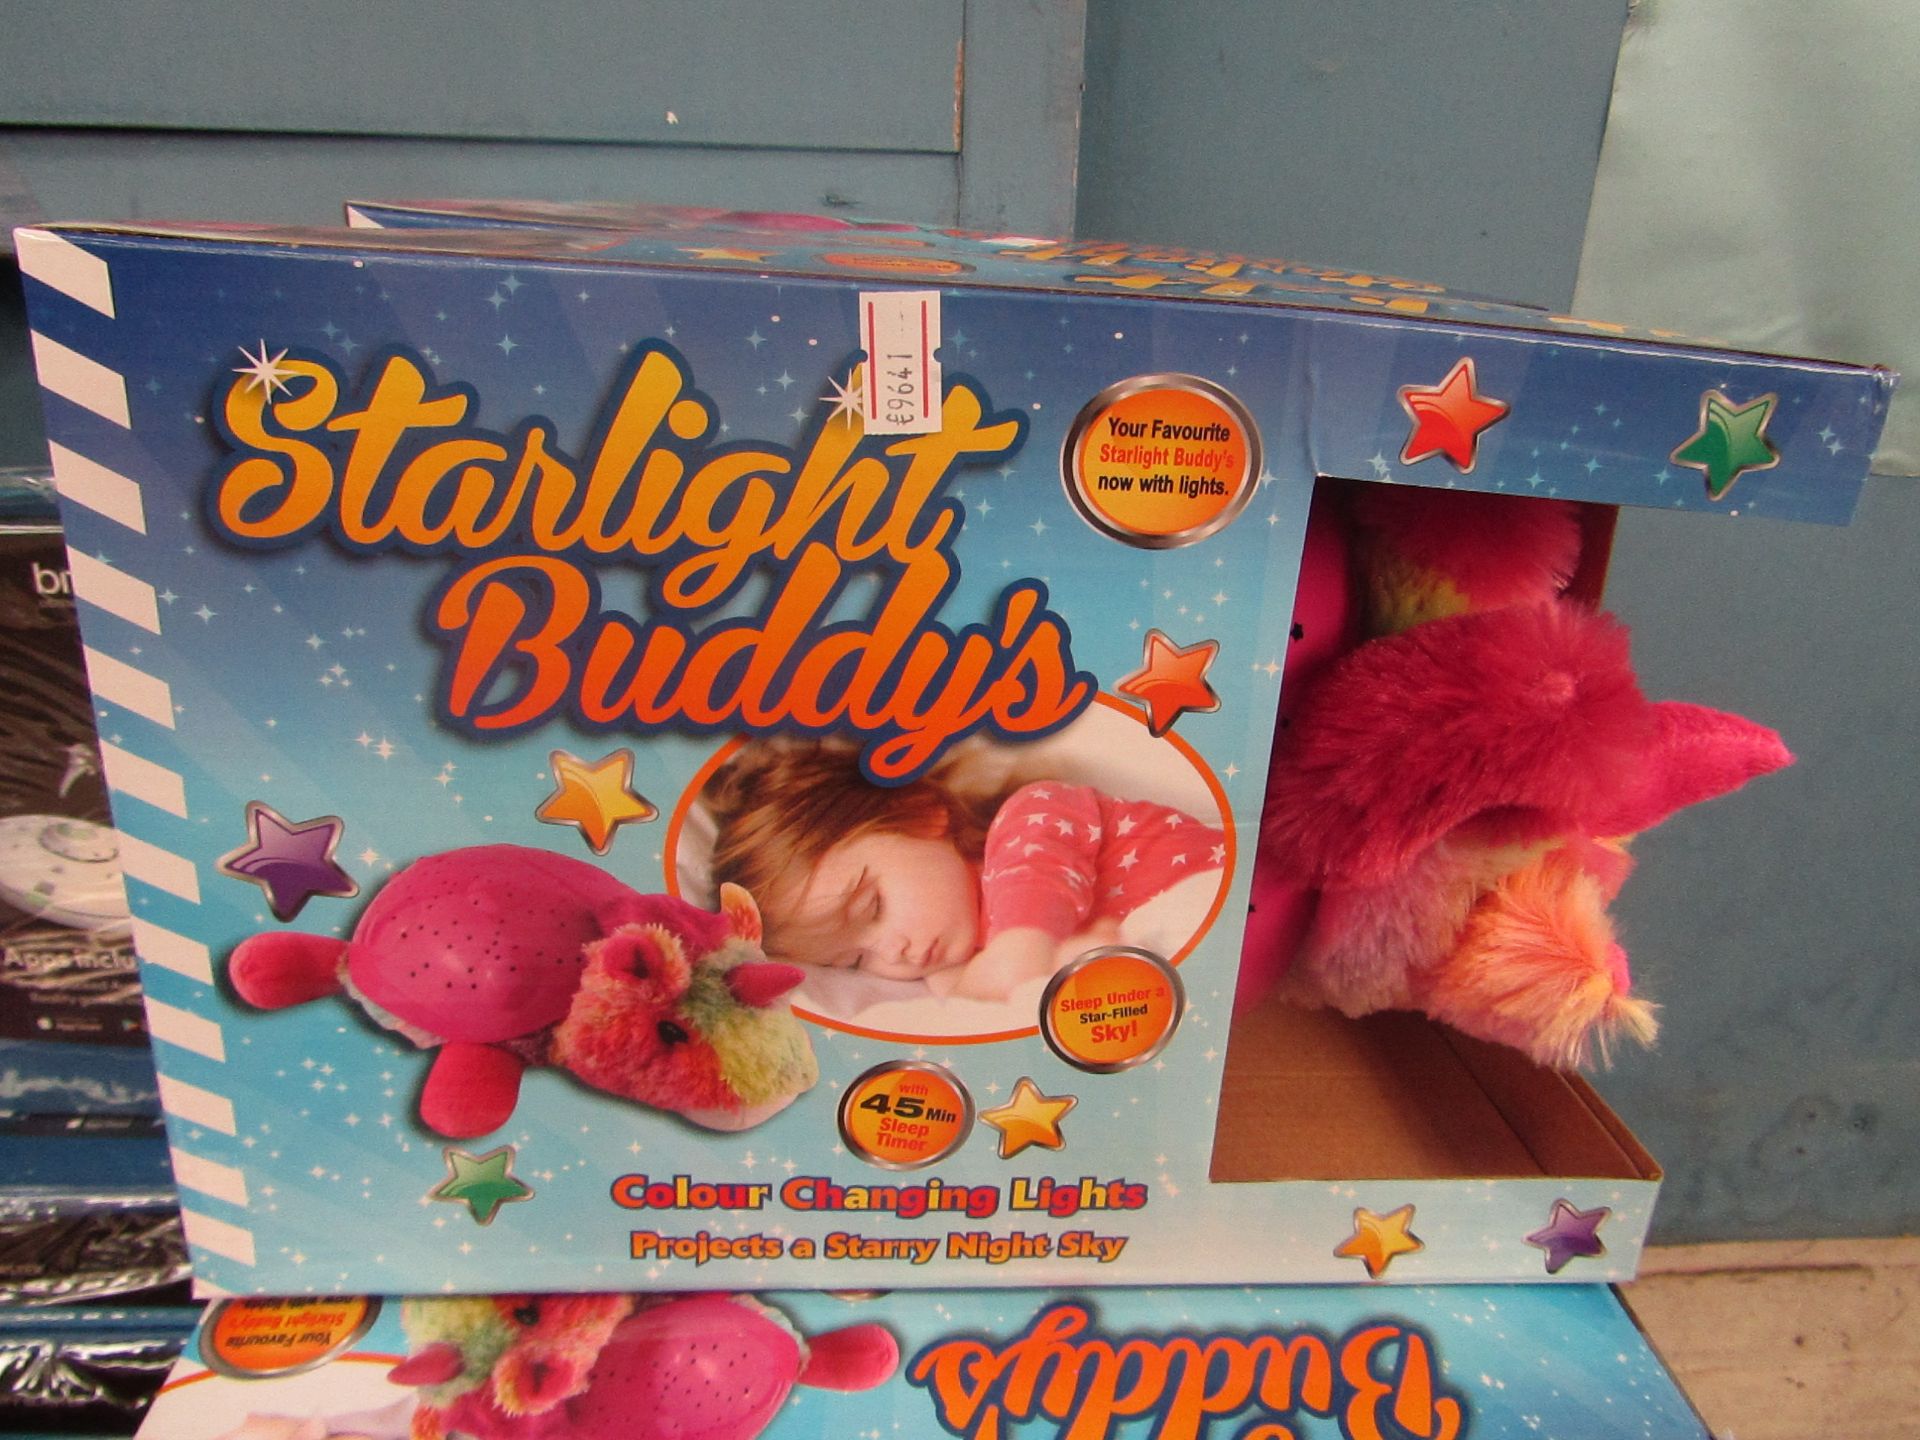 1 x Starbright Buddy's Colour Changing Lights Projects Starry Night Sky new & packaged